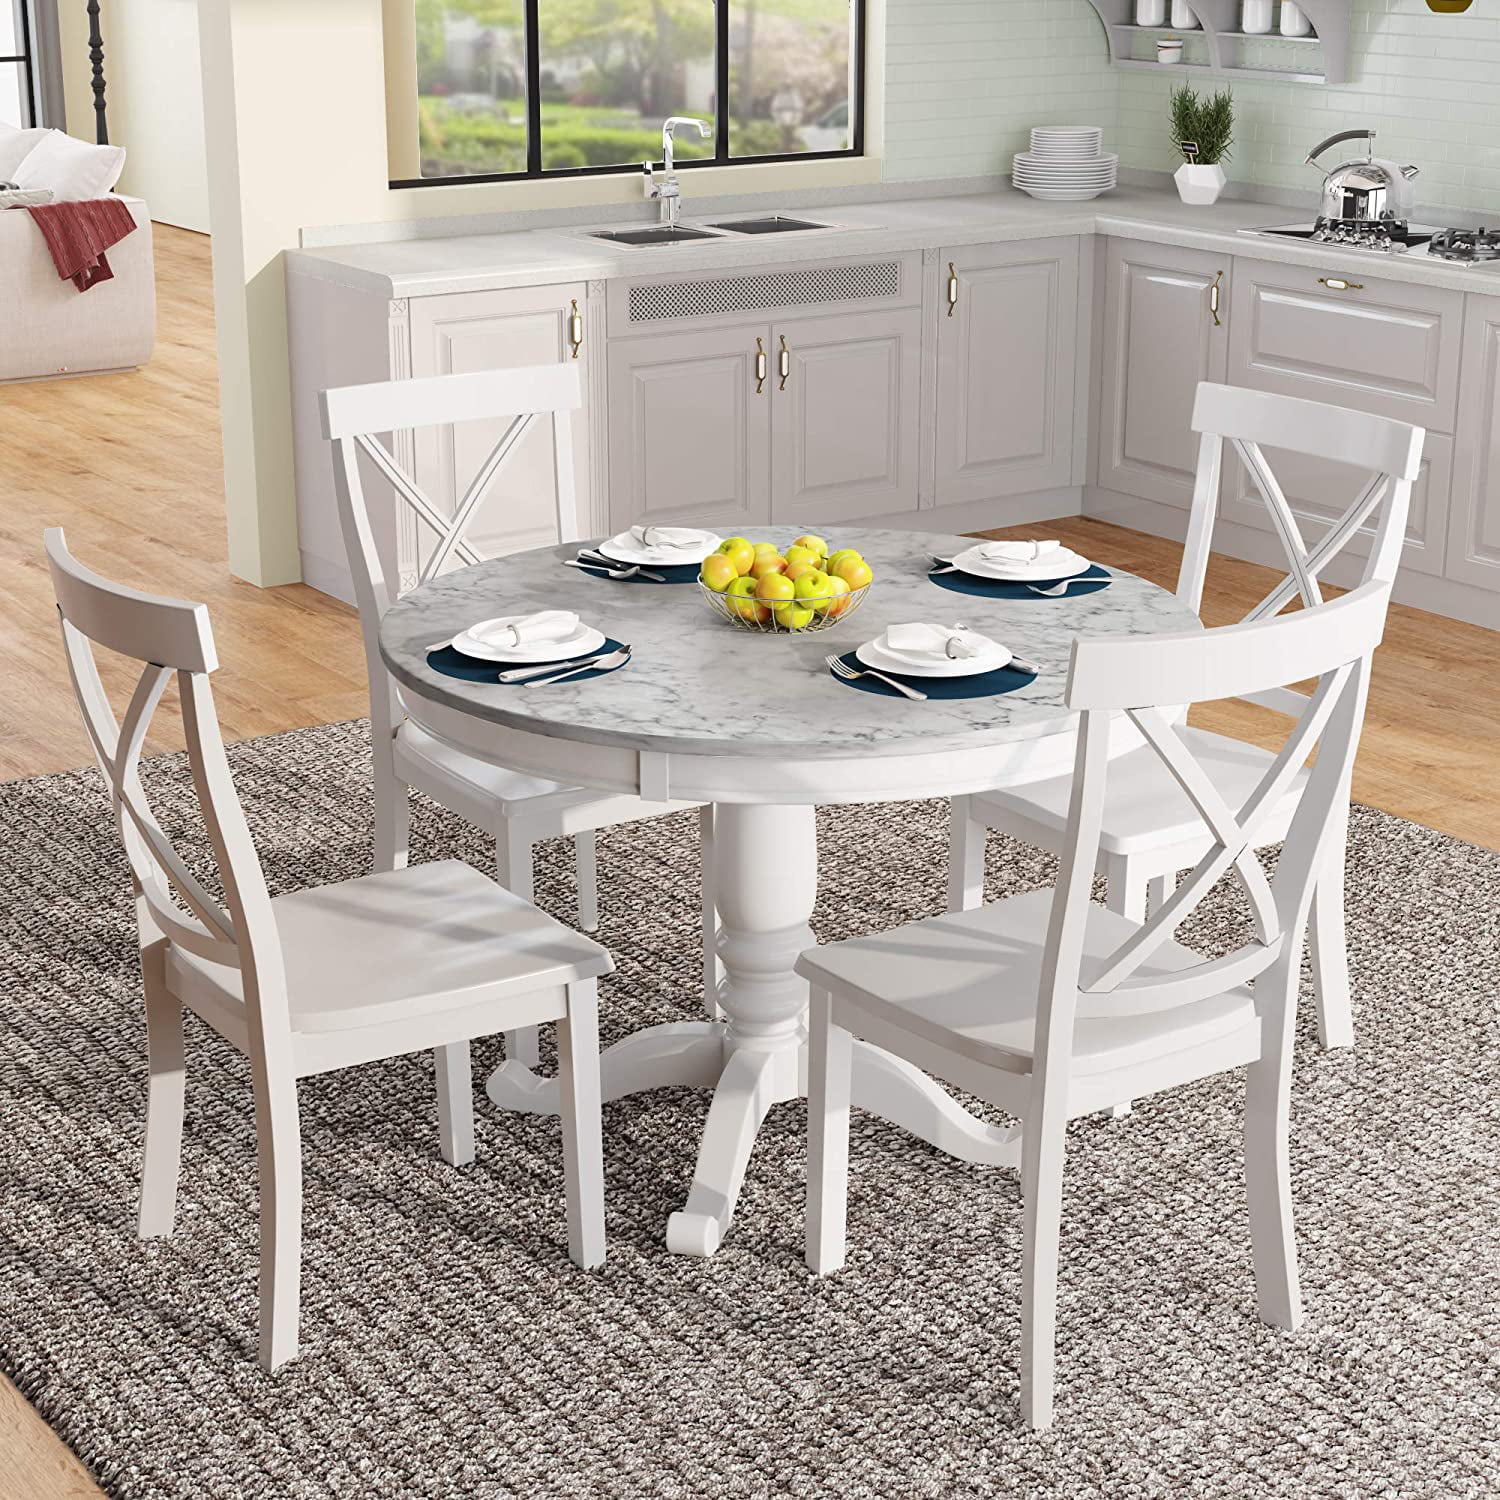 Dining Set Wood Round Kitchen Table, White Round Dining Table 4 Chairs